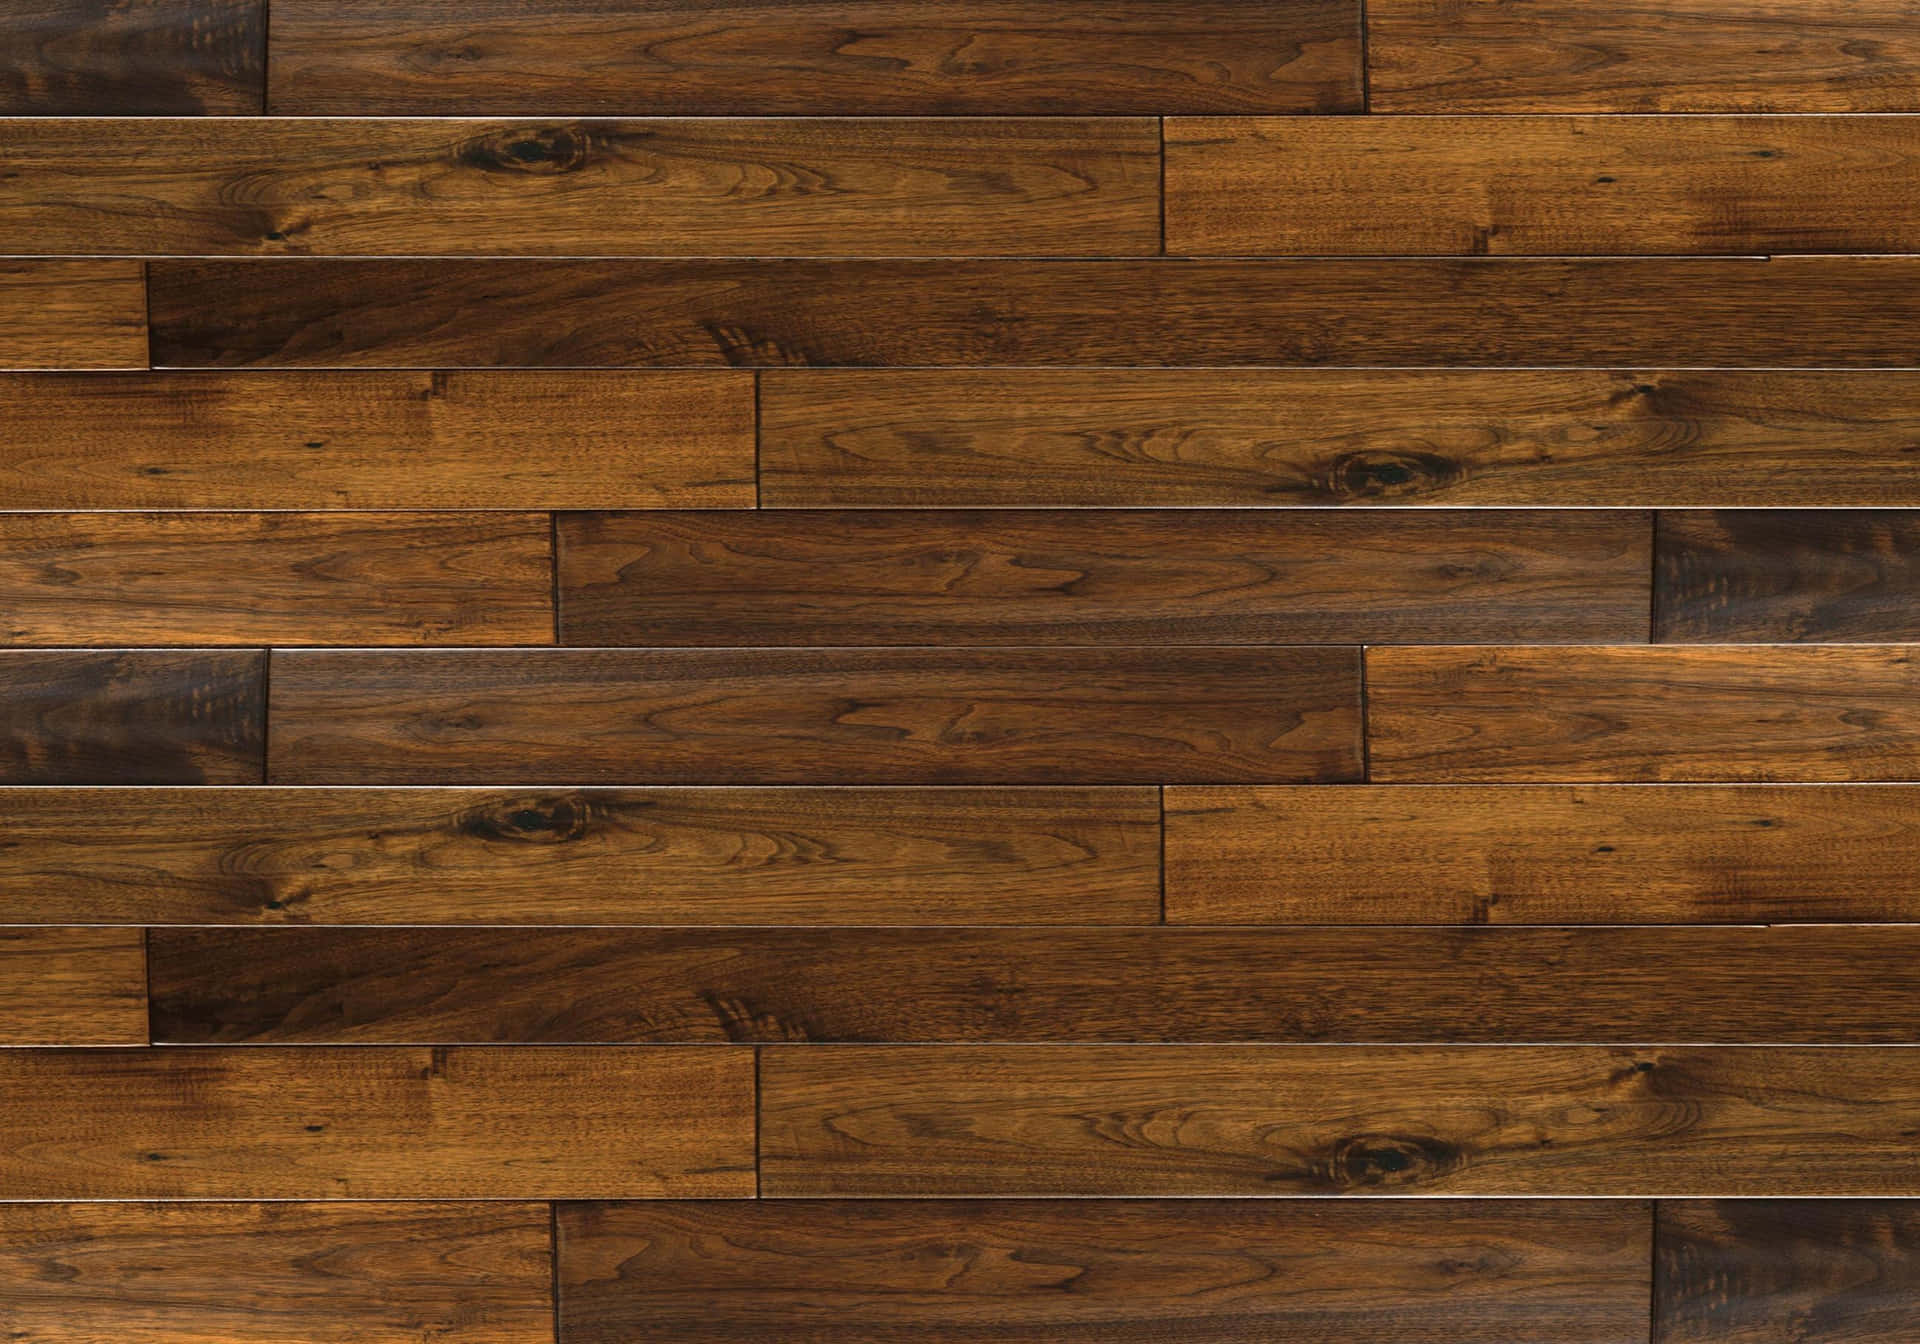 A Close Up Of A Wooden Floor With Dark Brown Wood